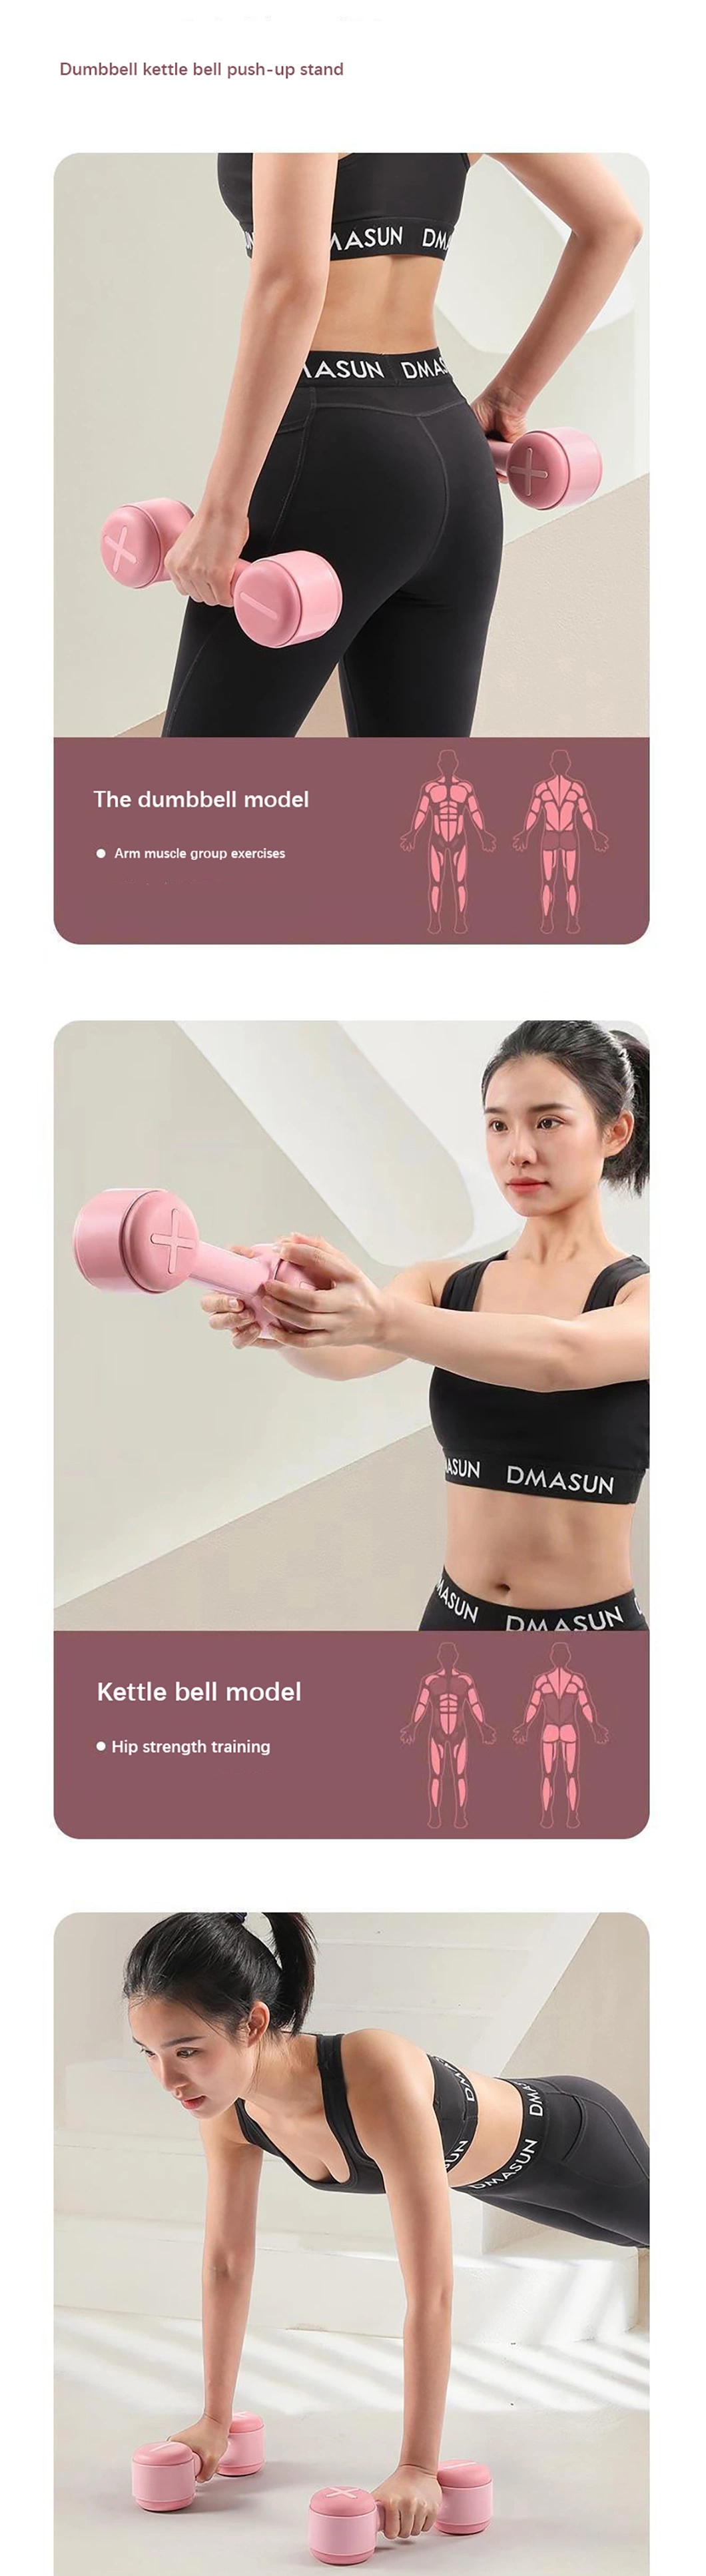 Economic Moon Home Adjustable Fitness Dumbbell Indoor Yoga Exercise Jump Exercises Dedicated